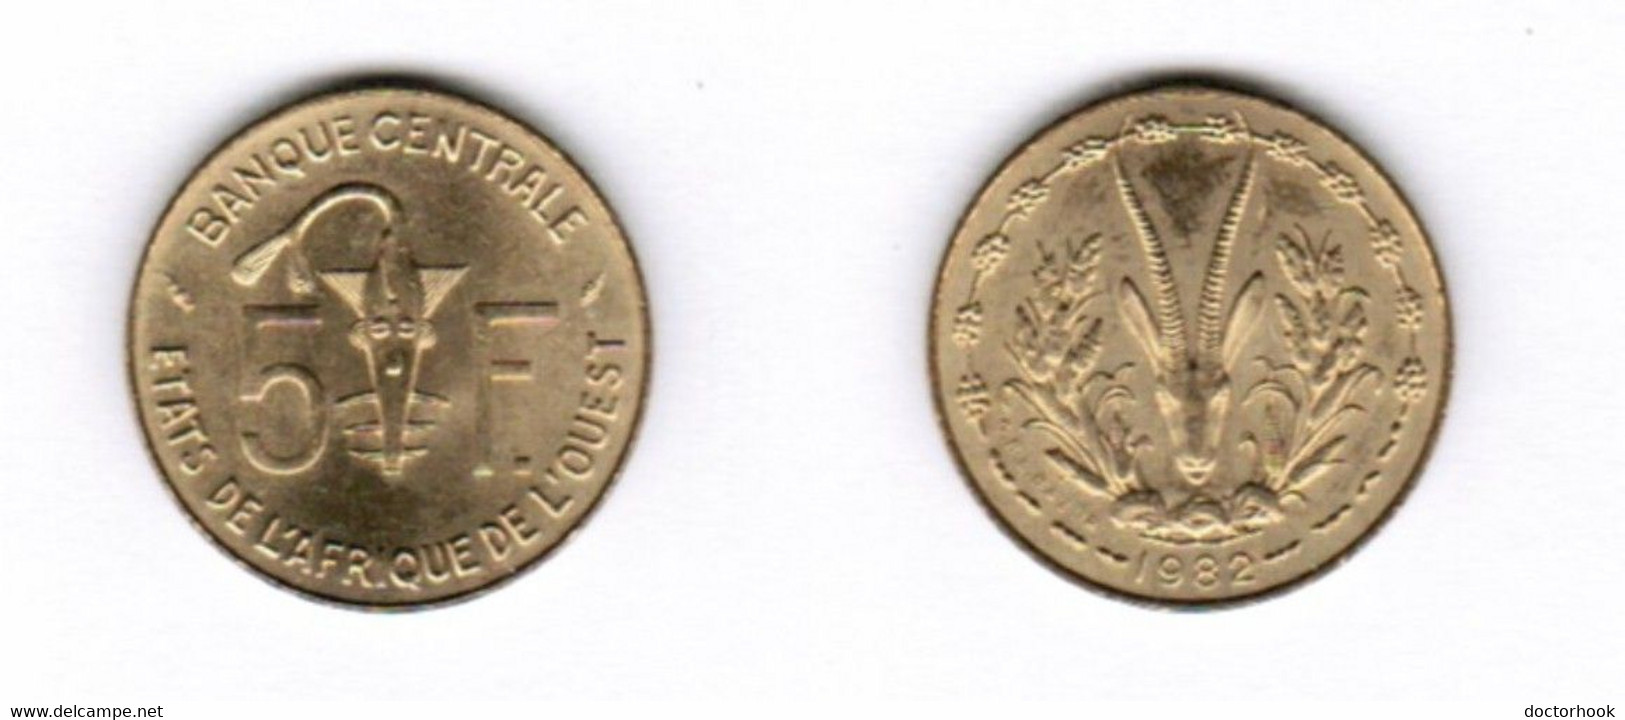 FRENCH WEST AFRICA   5 FRANCS 1982 (KM # 2a) #7011 - French West Africa